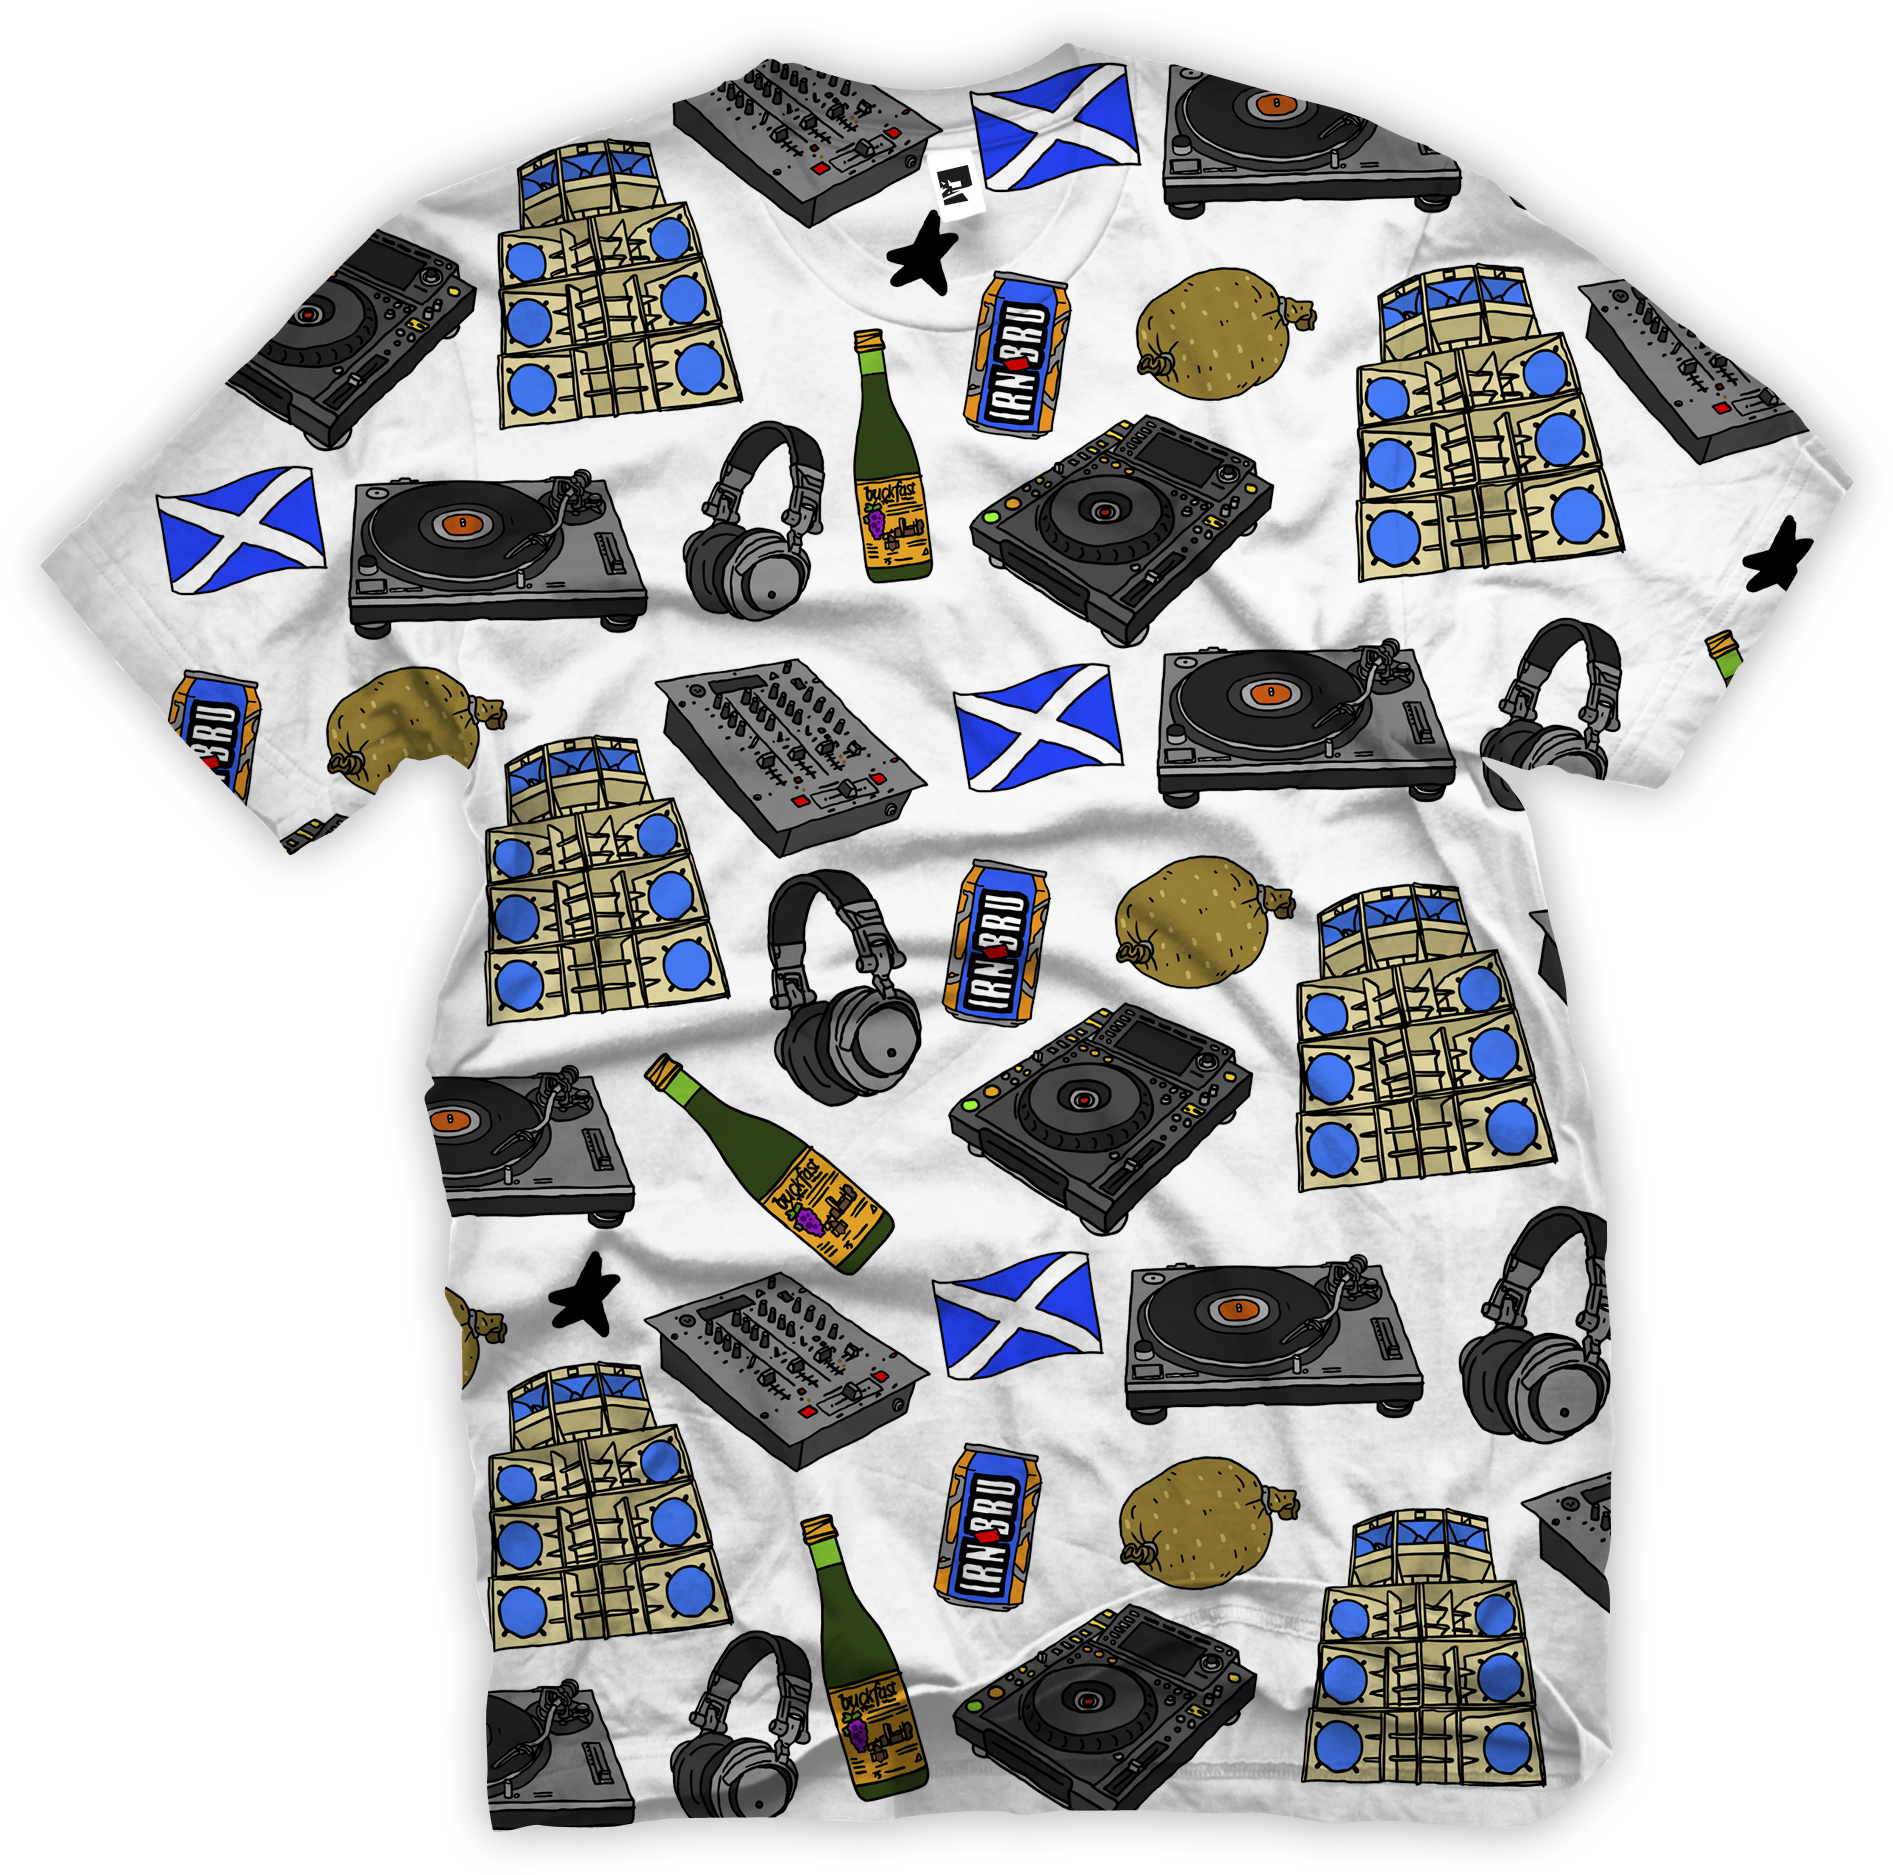 A Shirt With Different Objects On It